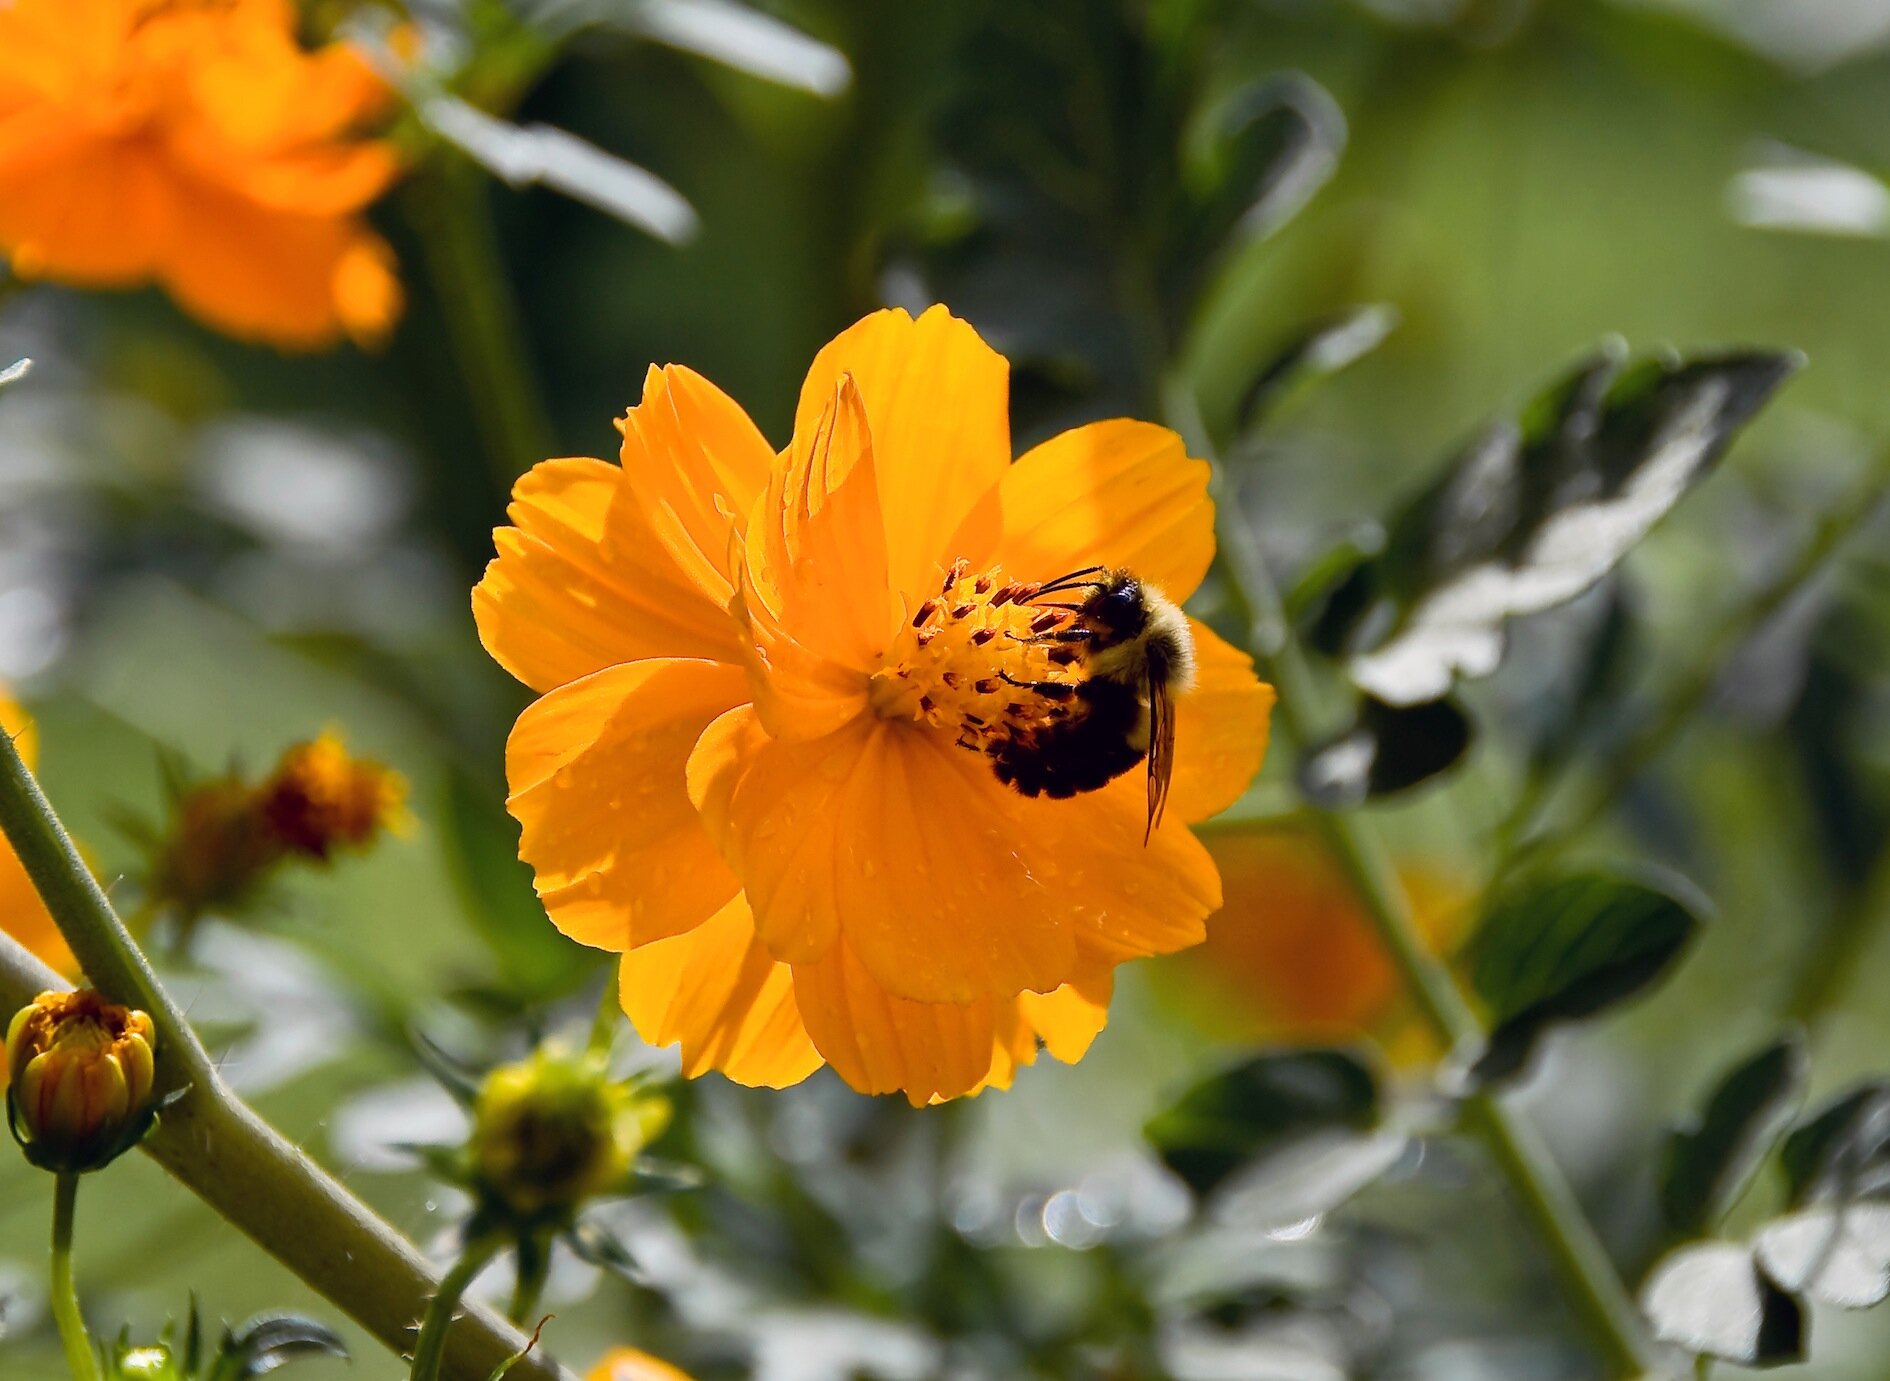 Buzzzzz! A community project in #LdnOnt that supports pollination gardens.